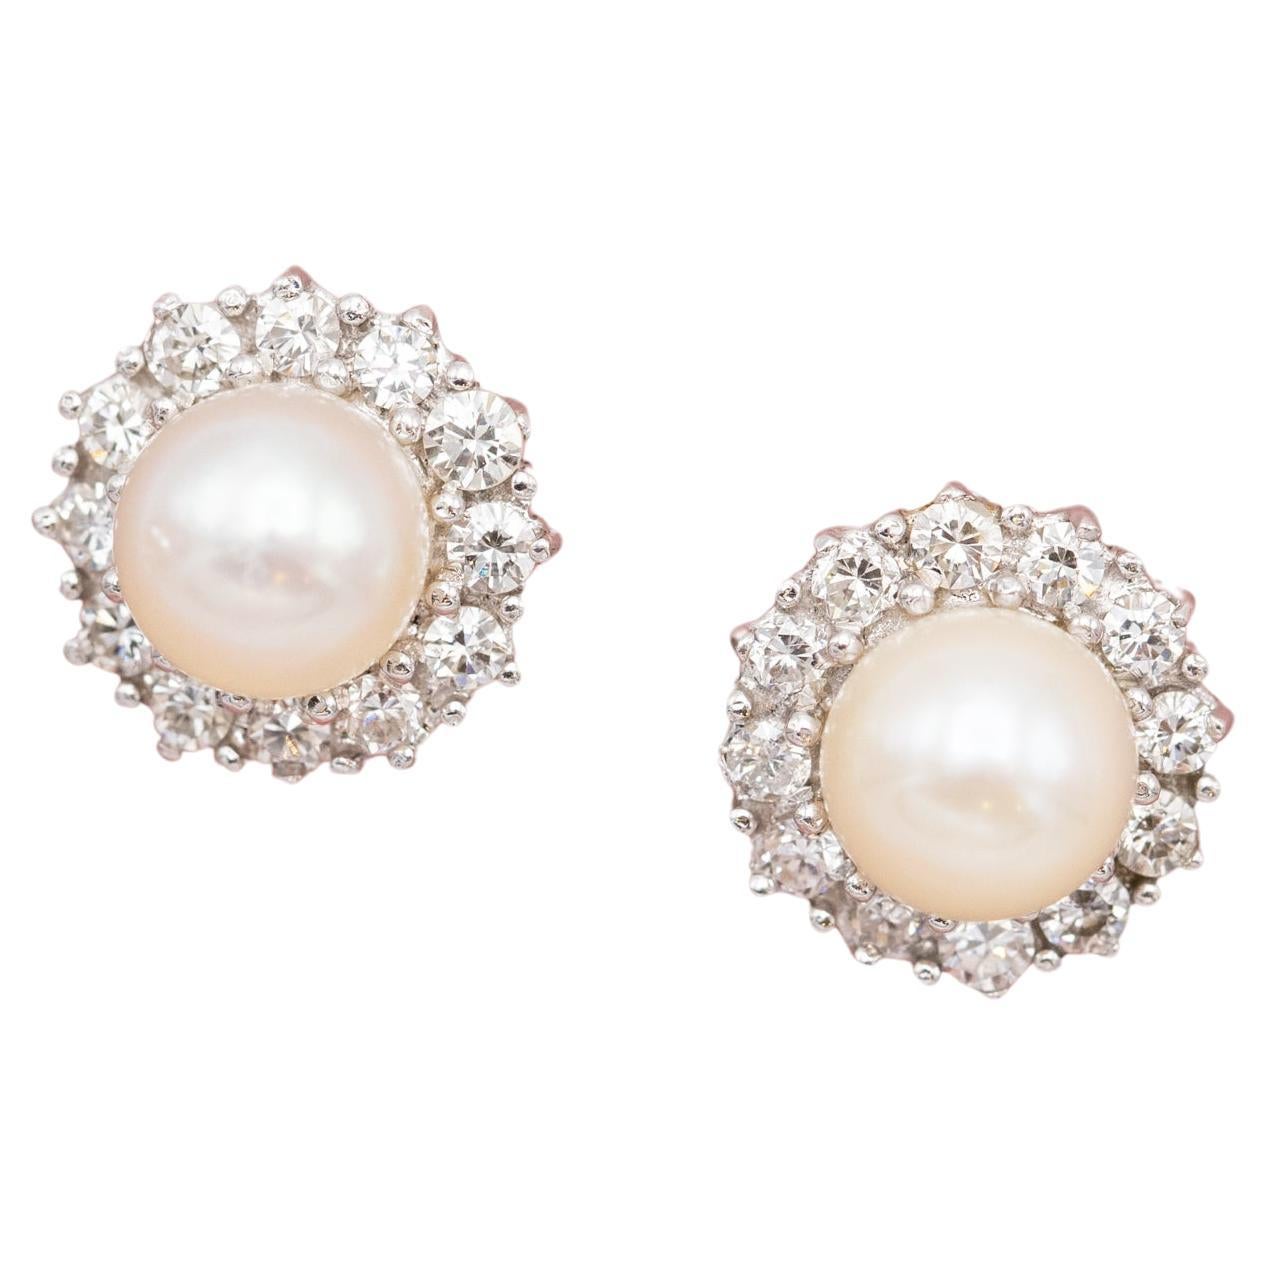 18K gold earrings - Small floral diamond and pearl cluster studs - 0.6 ct For Sale